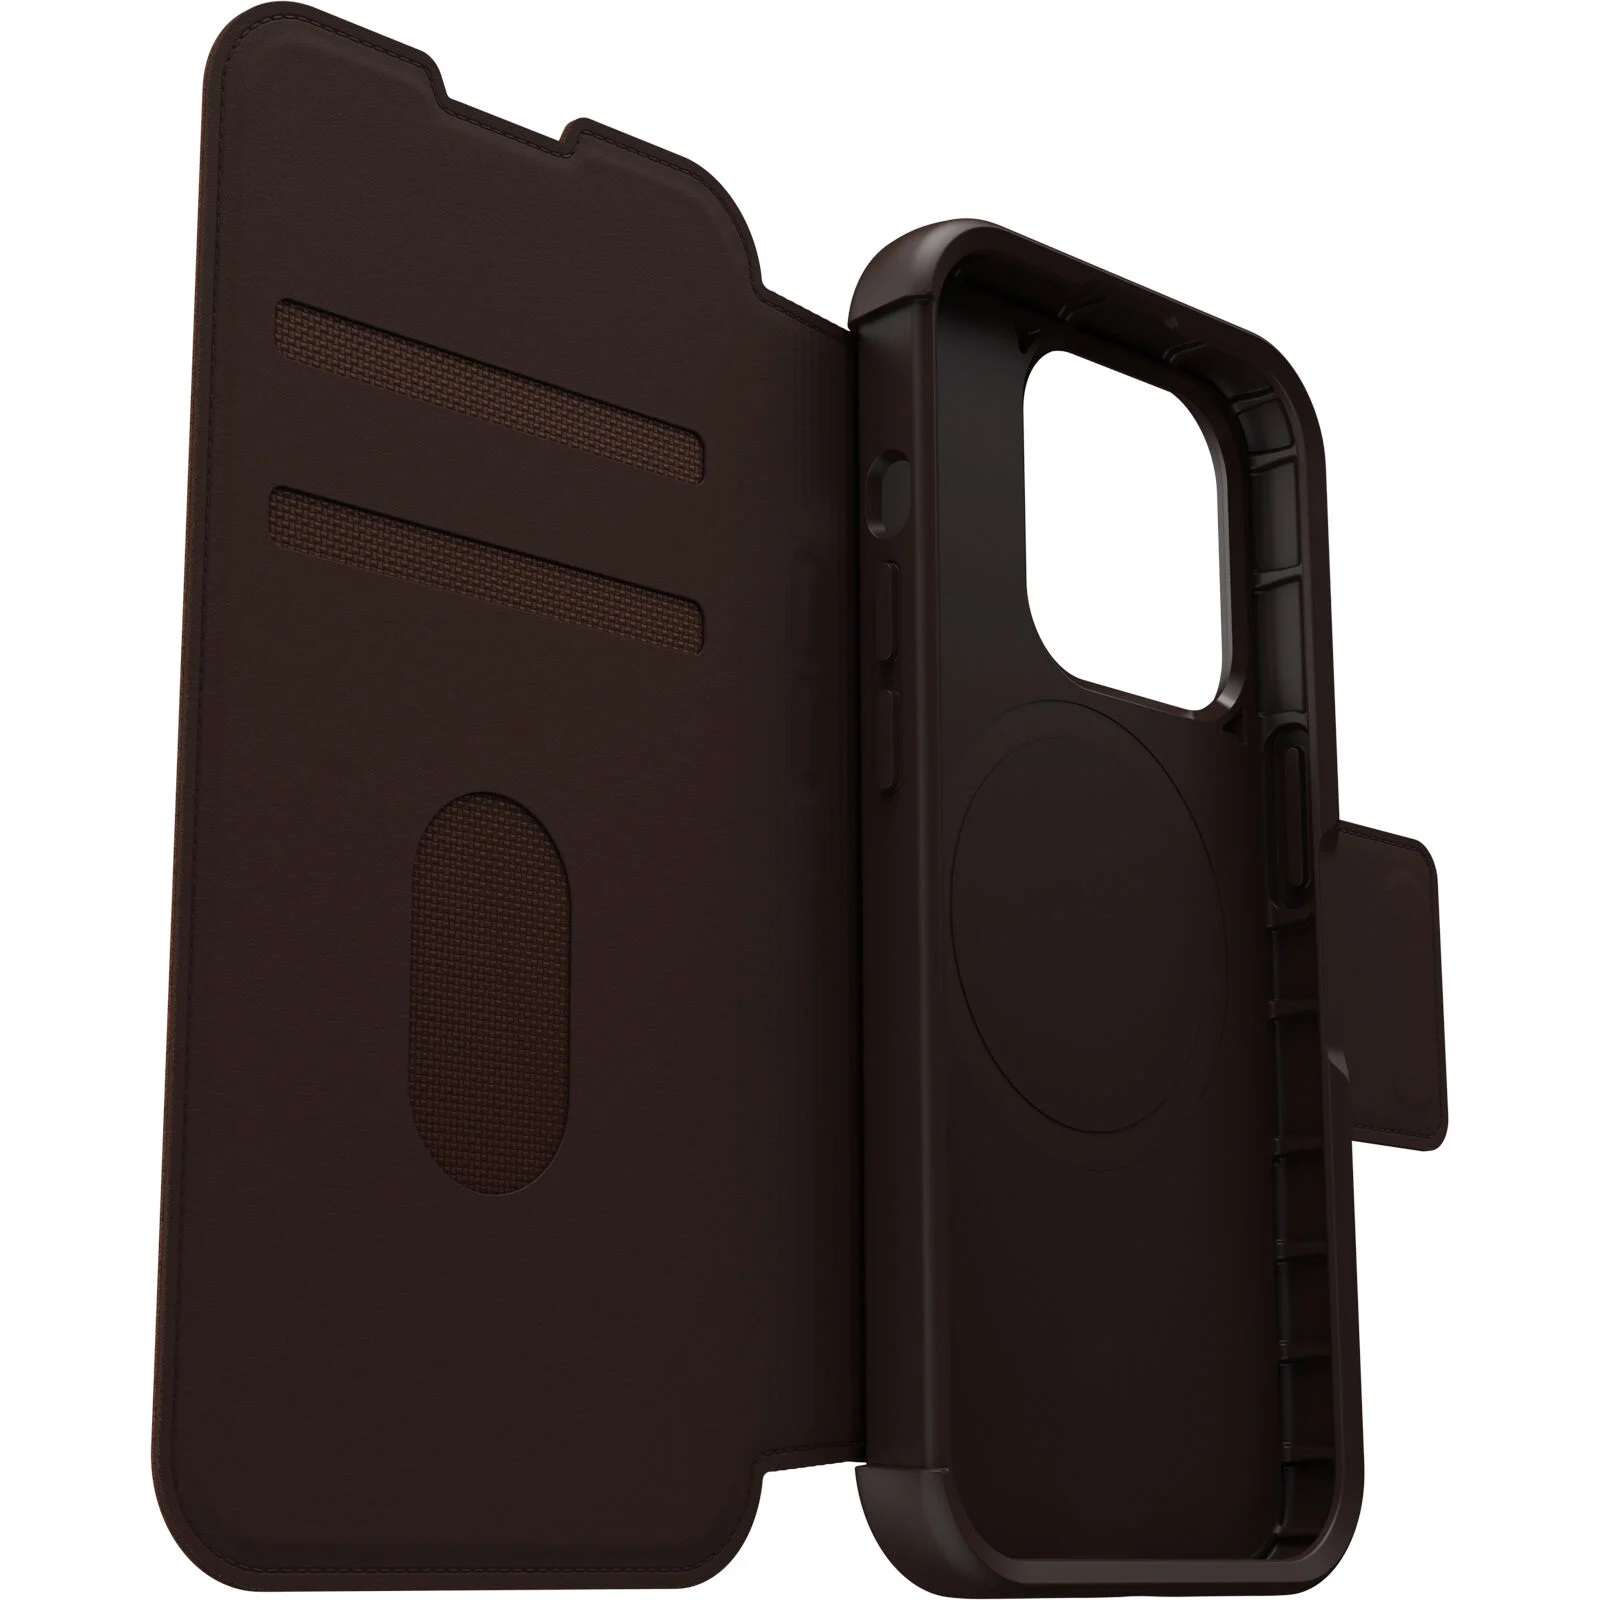 OtterBox Strada MagSafe Apple iPhone 15 Pro (6.1″) Case Espresso (Brown) – (77-93559), DROP+ 3X Military Standard, Leather Folio Cover